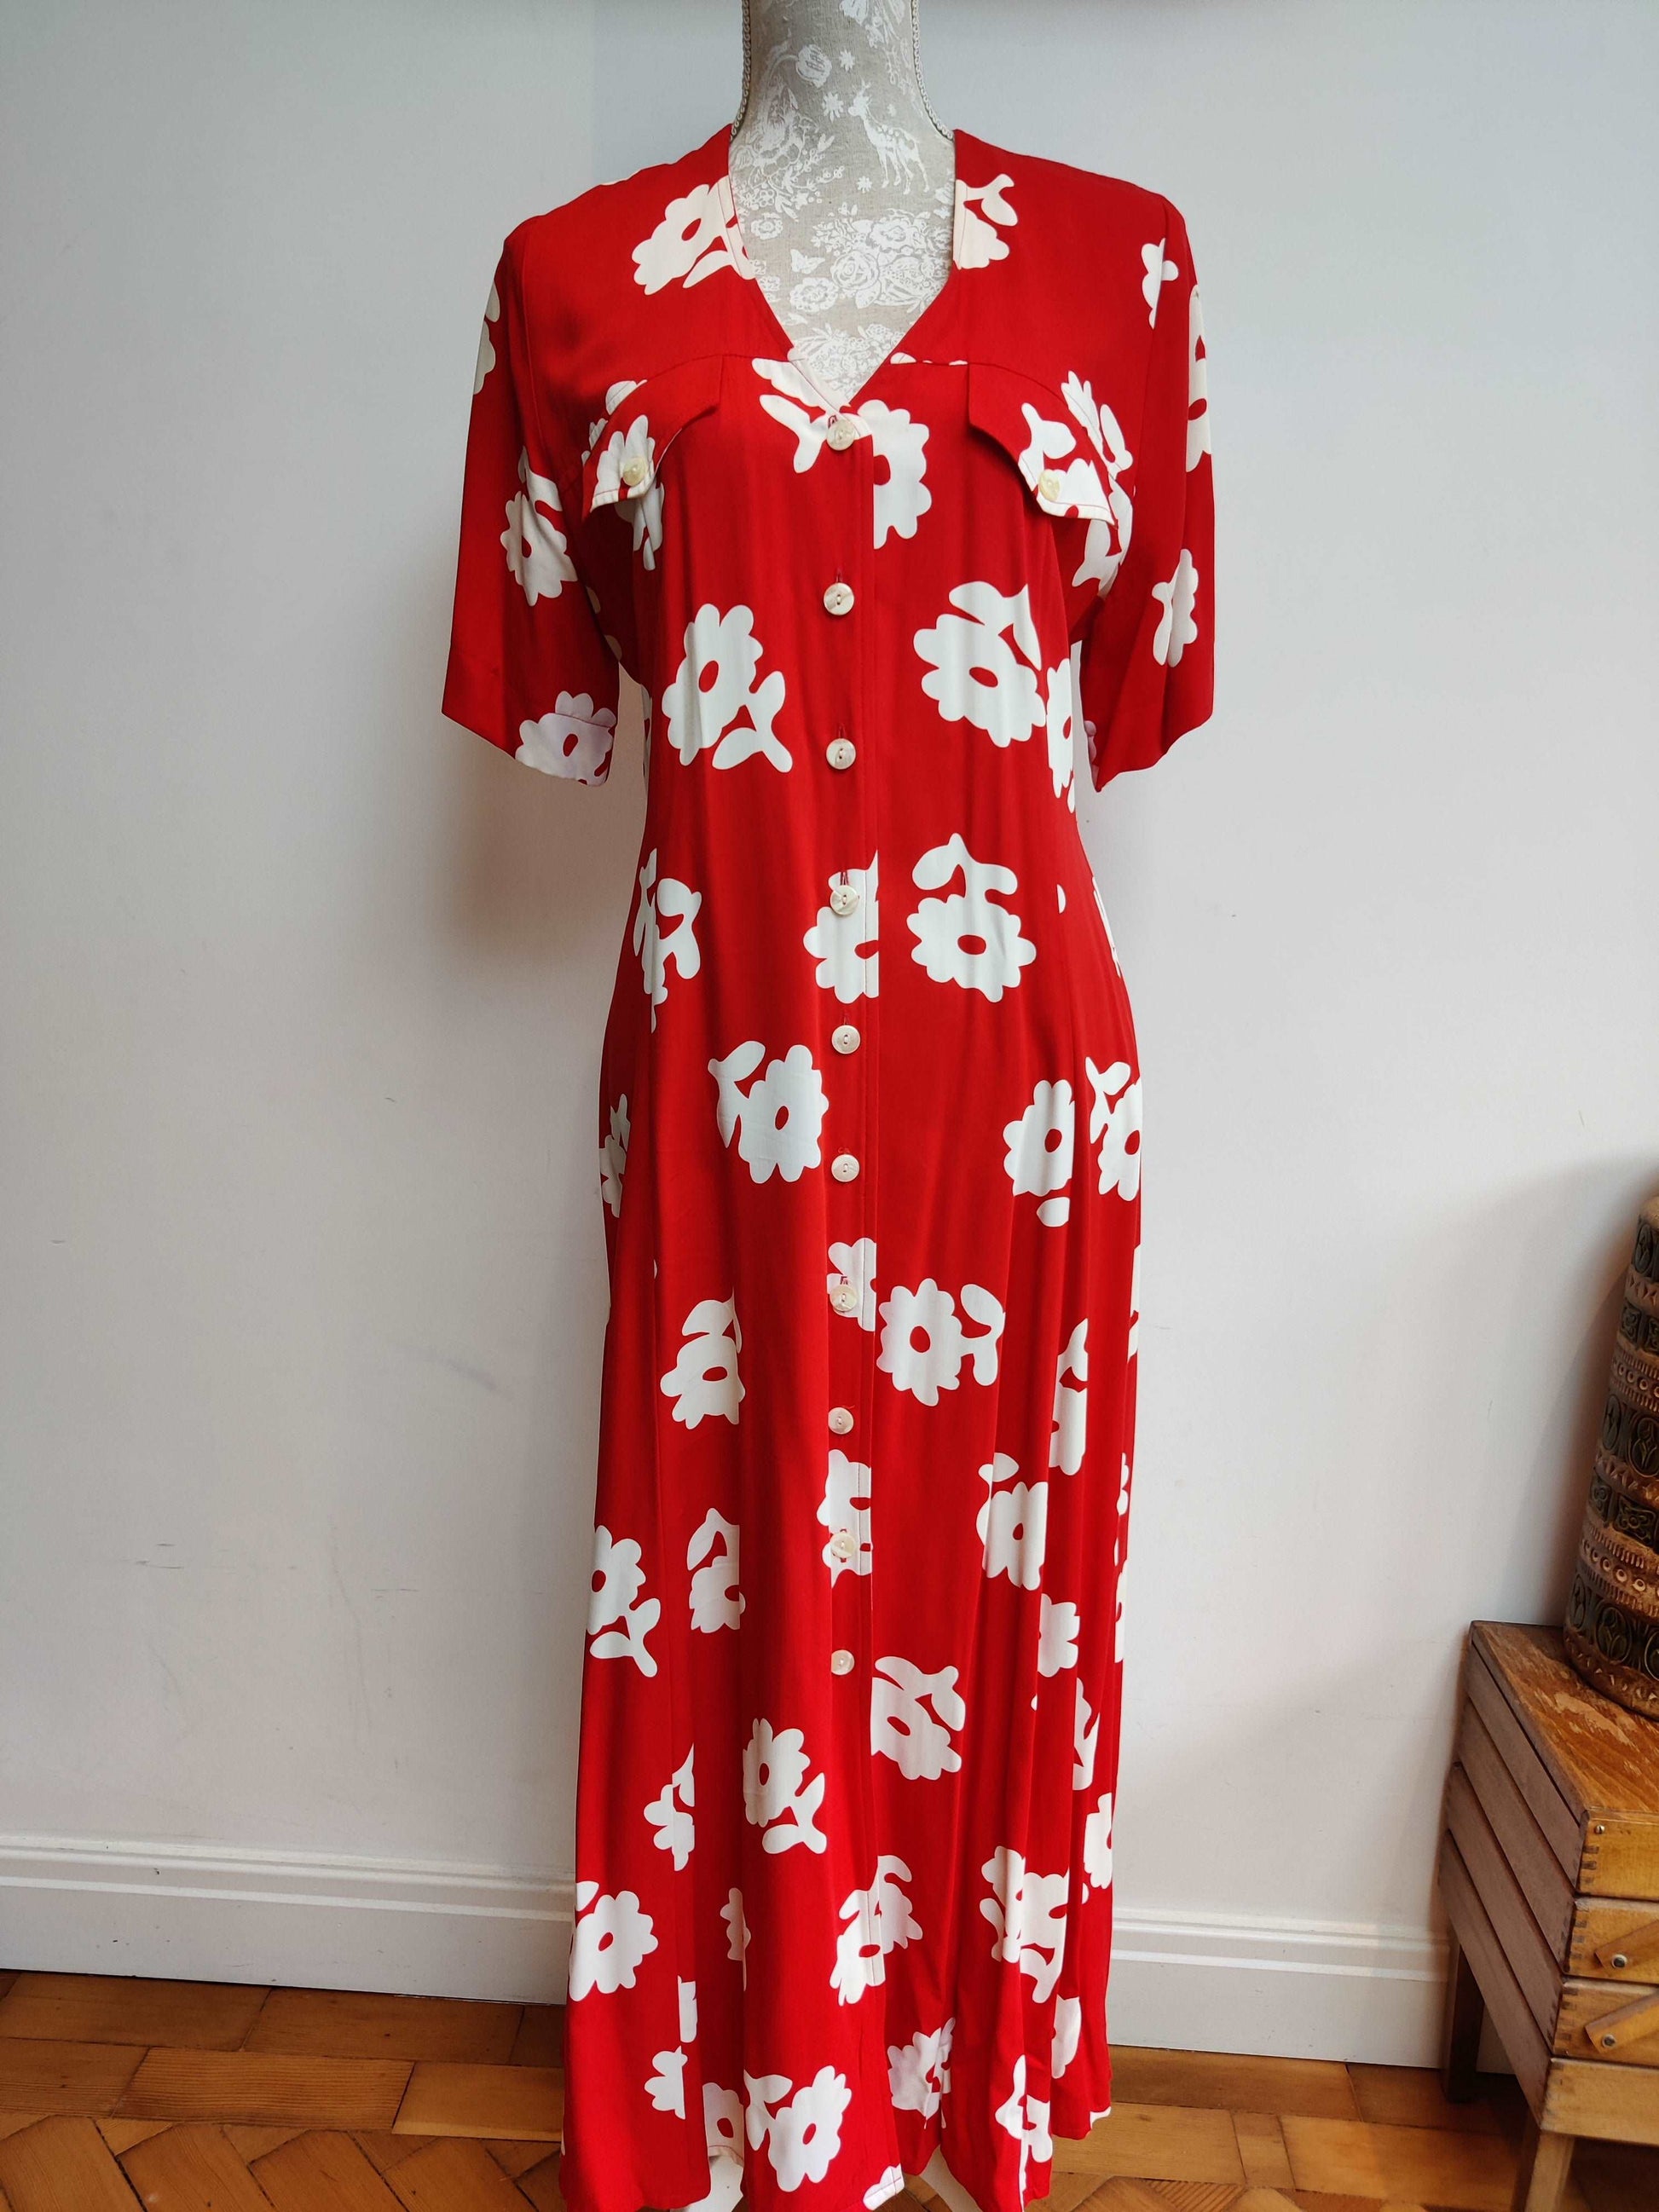 Vintage day dress in red